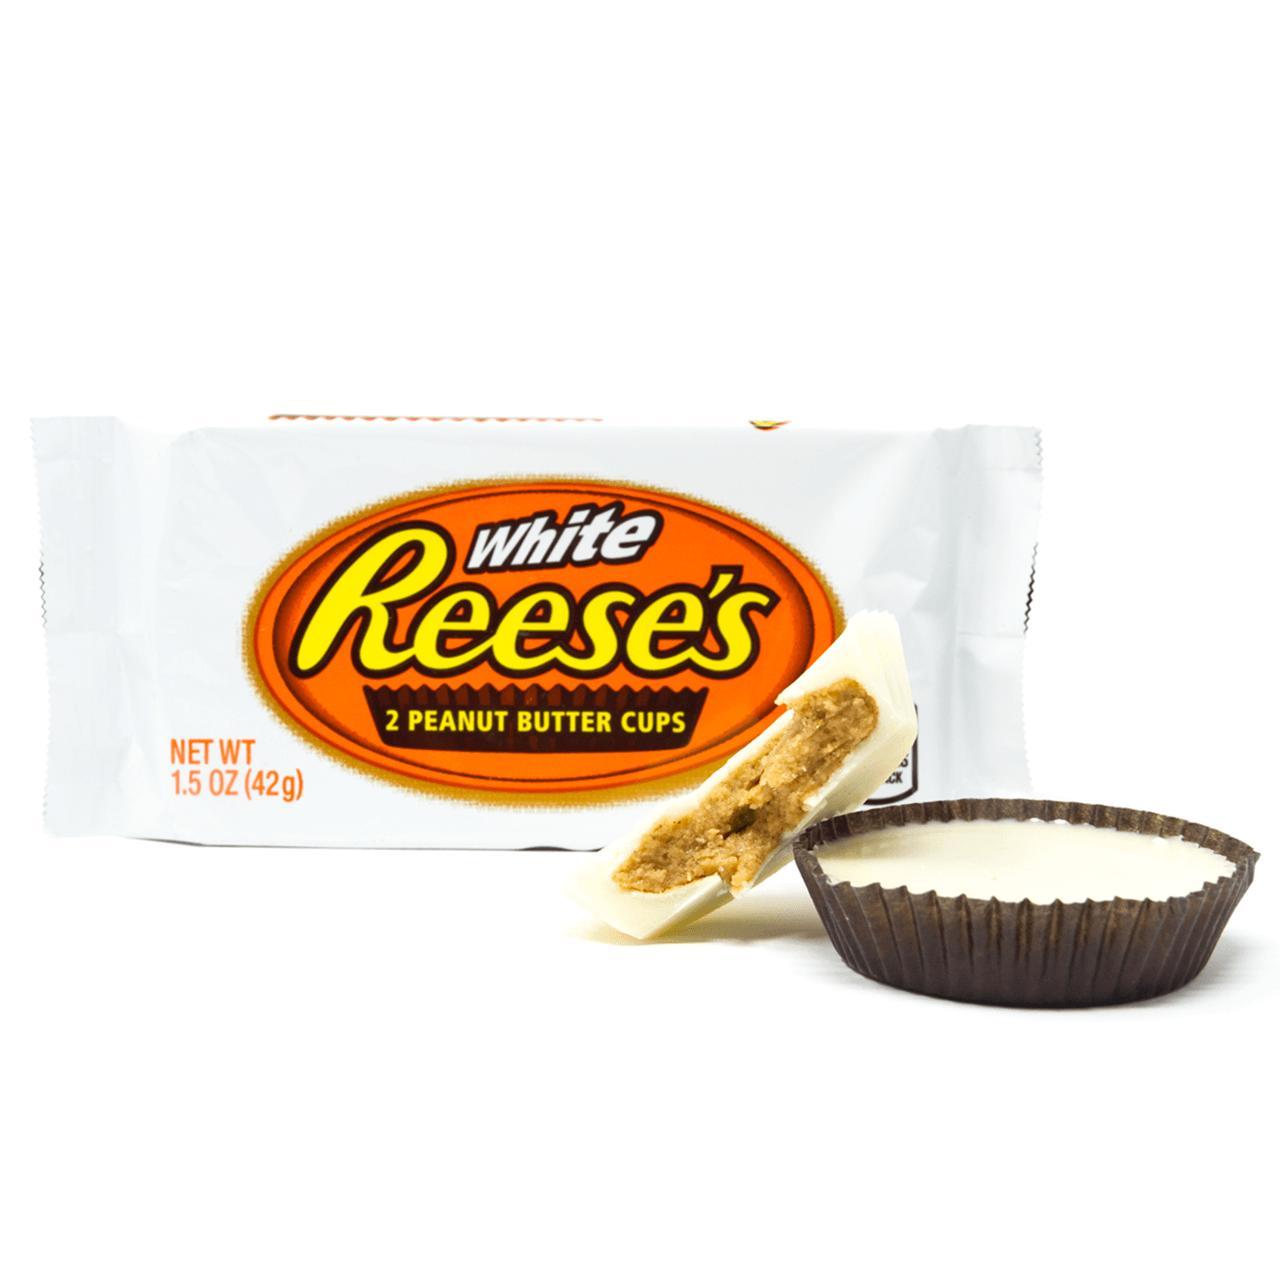 Butter cups. Reese"s 2 Peanut Butter Cups 42g. Reeses белый шоколад. Peanut Butter Cups. Reeses Cups.